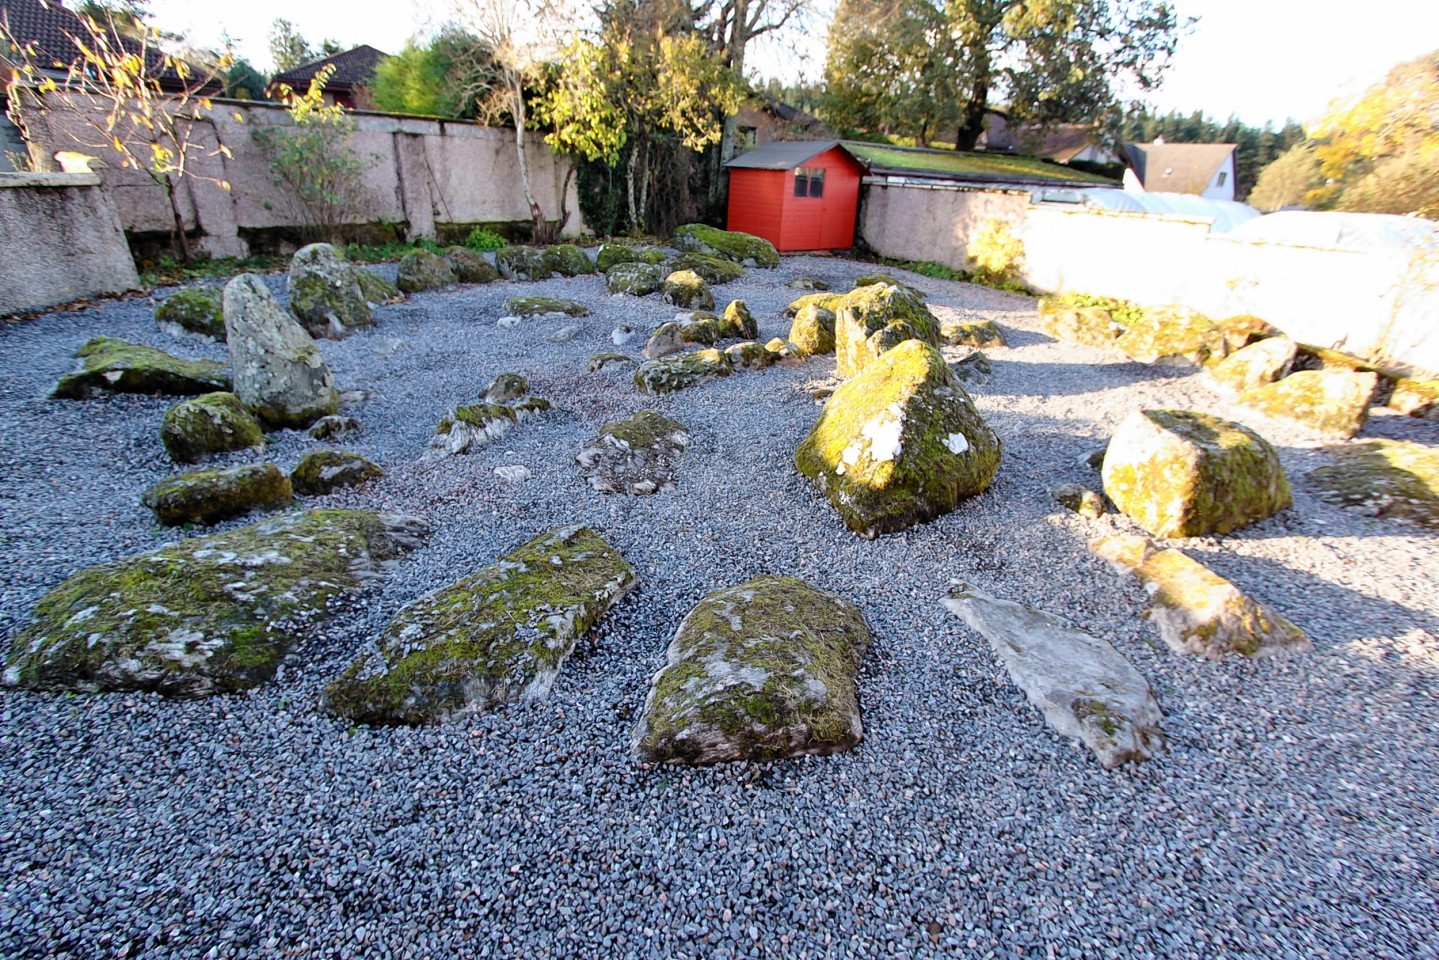 Stonehenge House near Inverness has a Pictish stone circle in the back garden